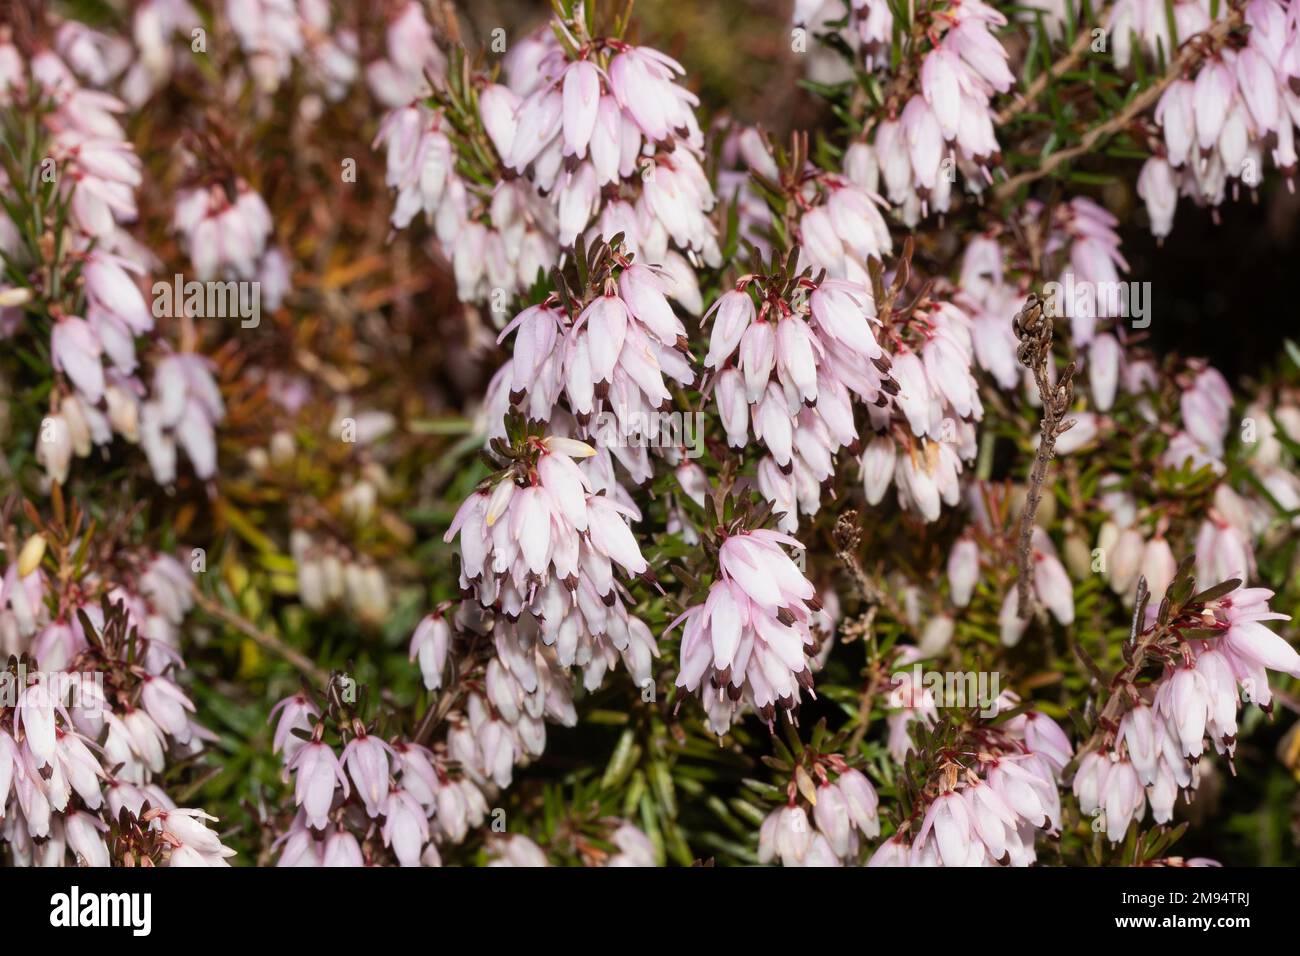 Snow bell heather, snow heather Stock with several flower panicles with many pink flowers Stock Photo